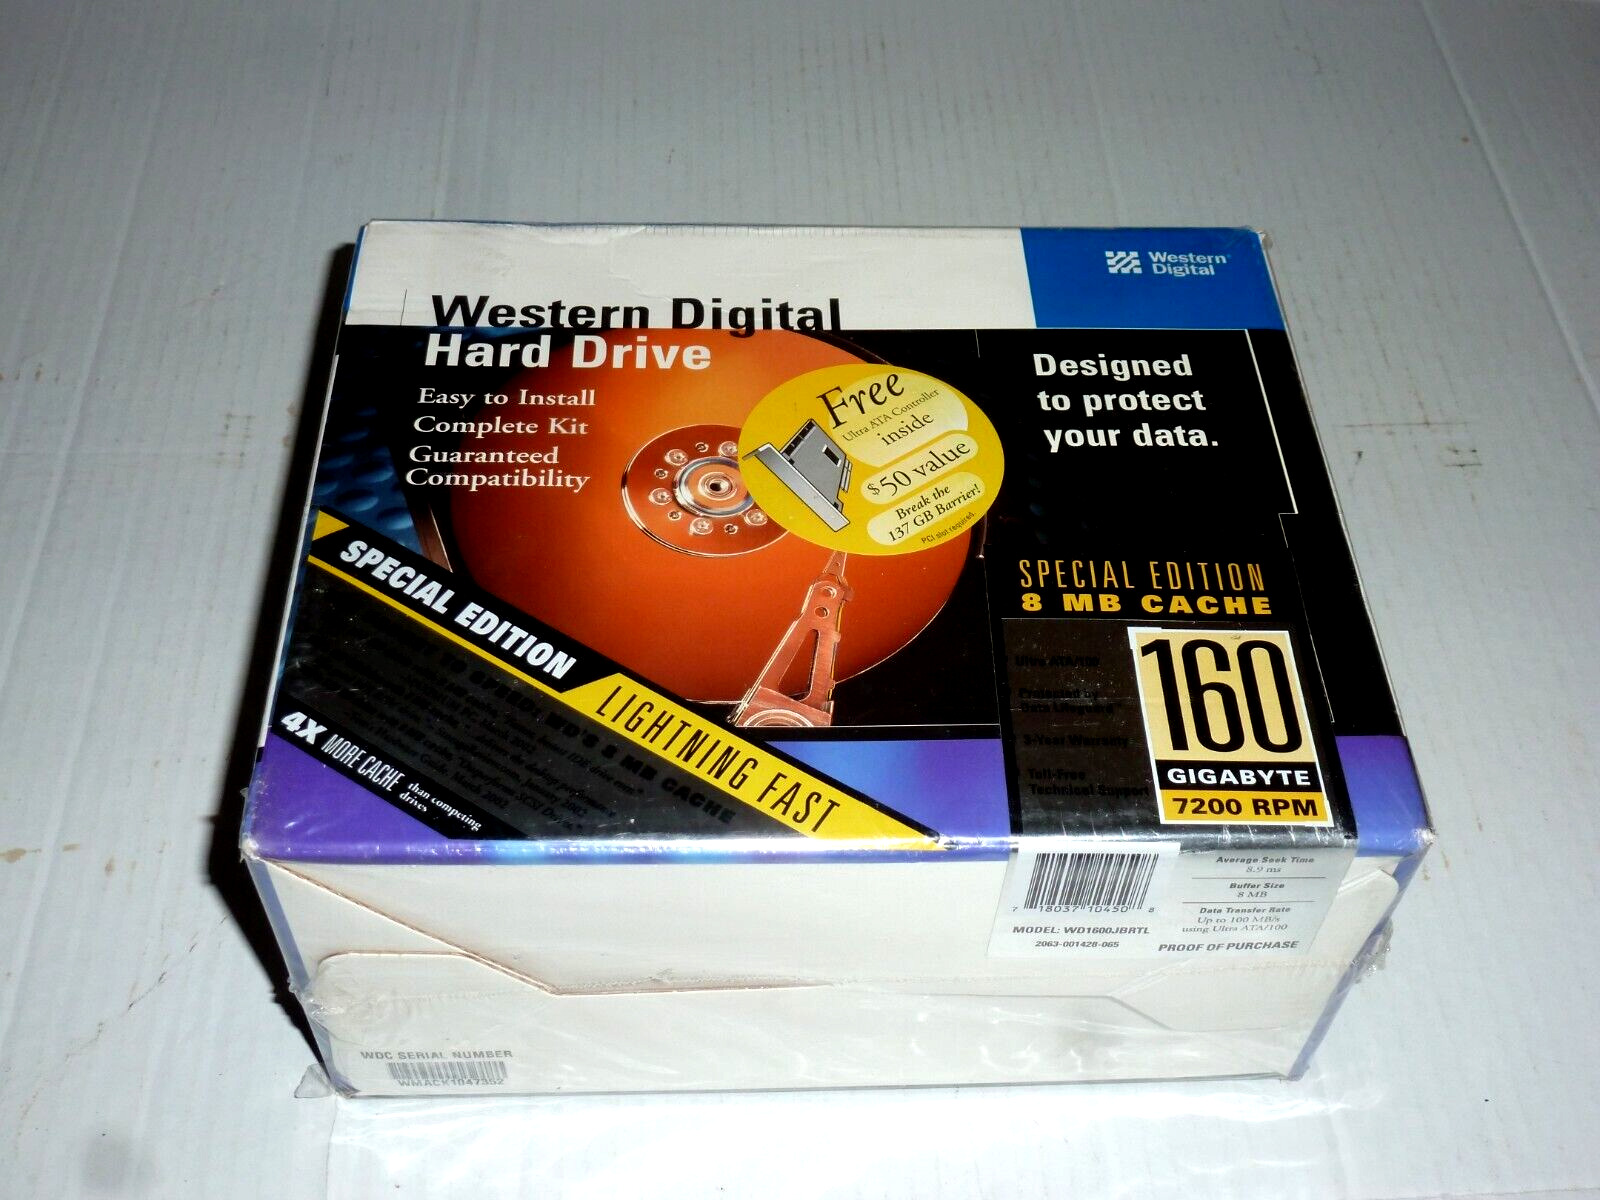 Western Digital 120 GB Hard Drive with 8MB Cache New Unopened Sealed